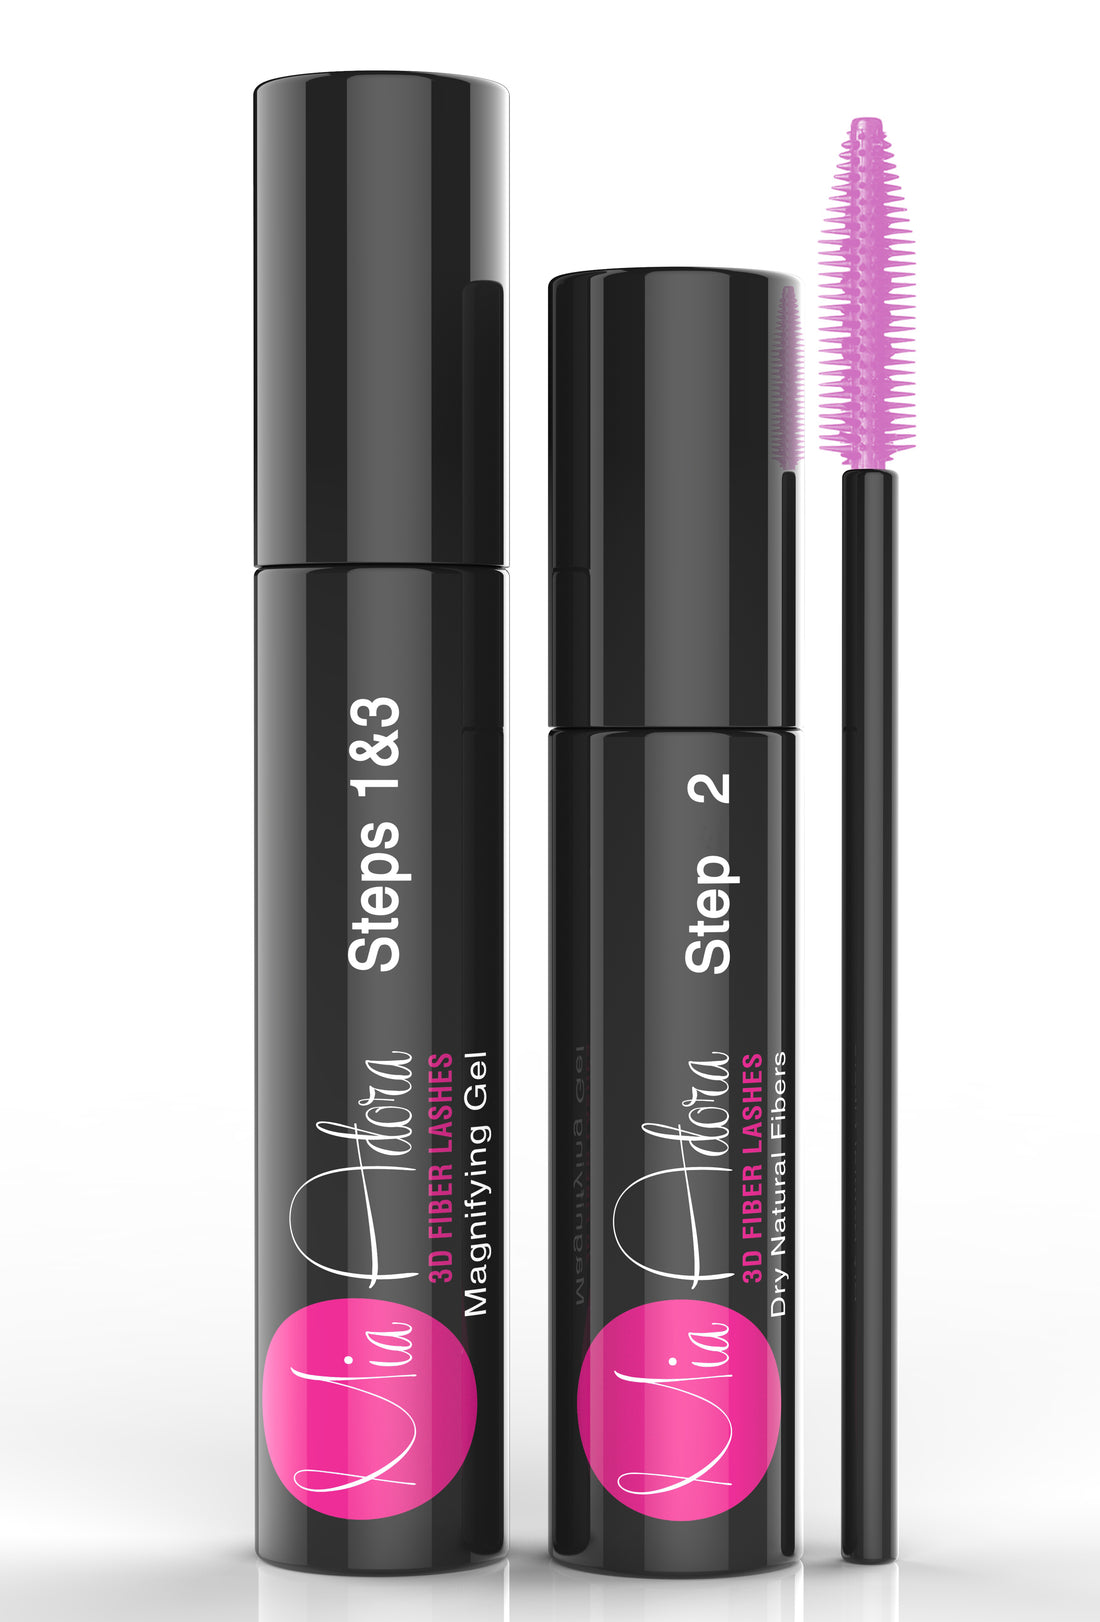 Cosmetic Company offers 3D Fiber Lash Mascara in Kentucky at an affordable price